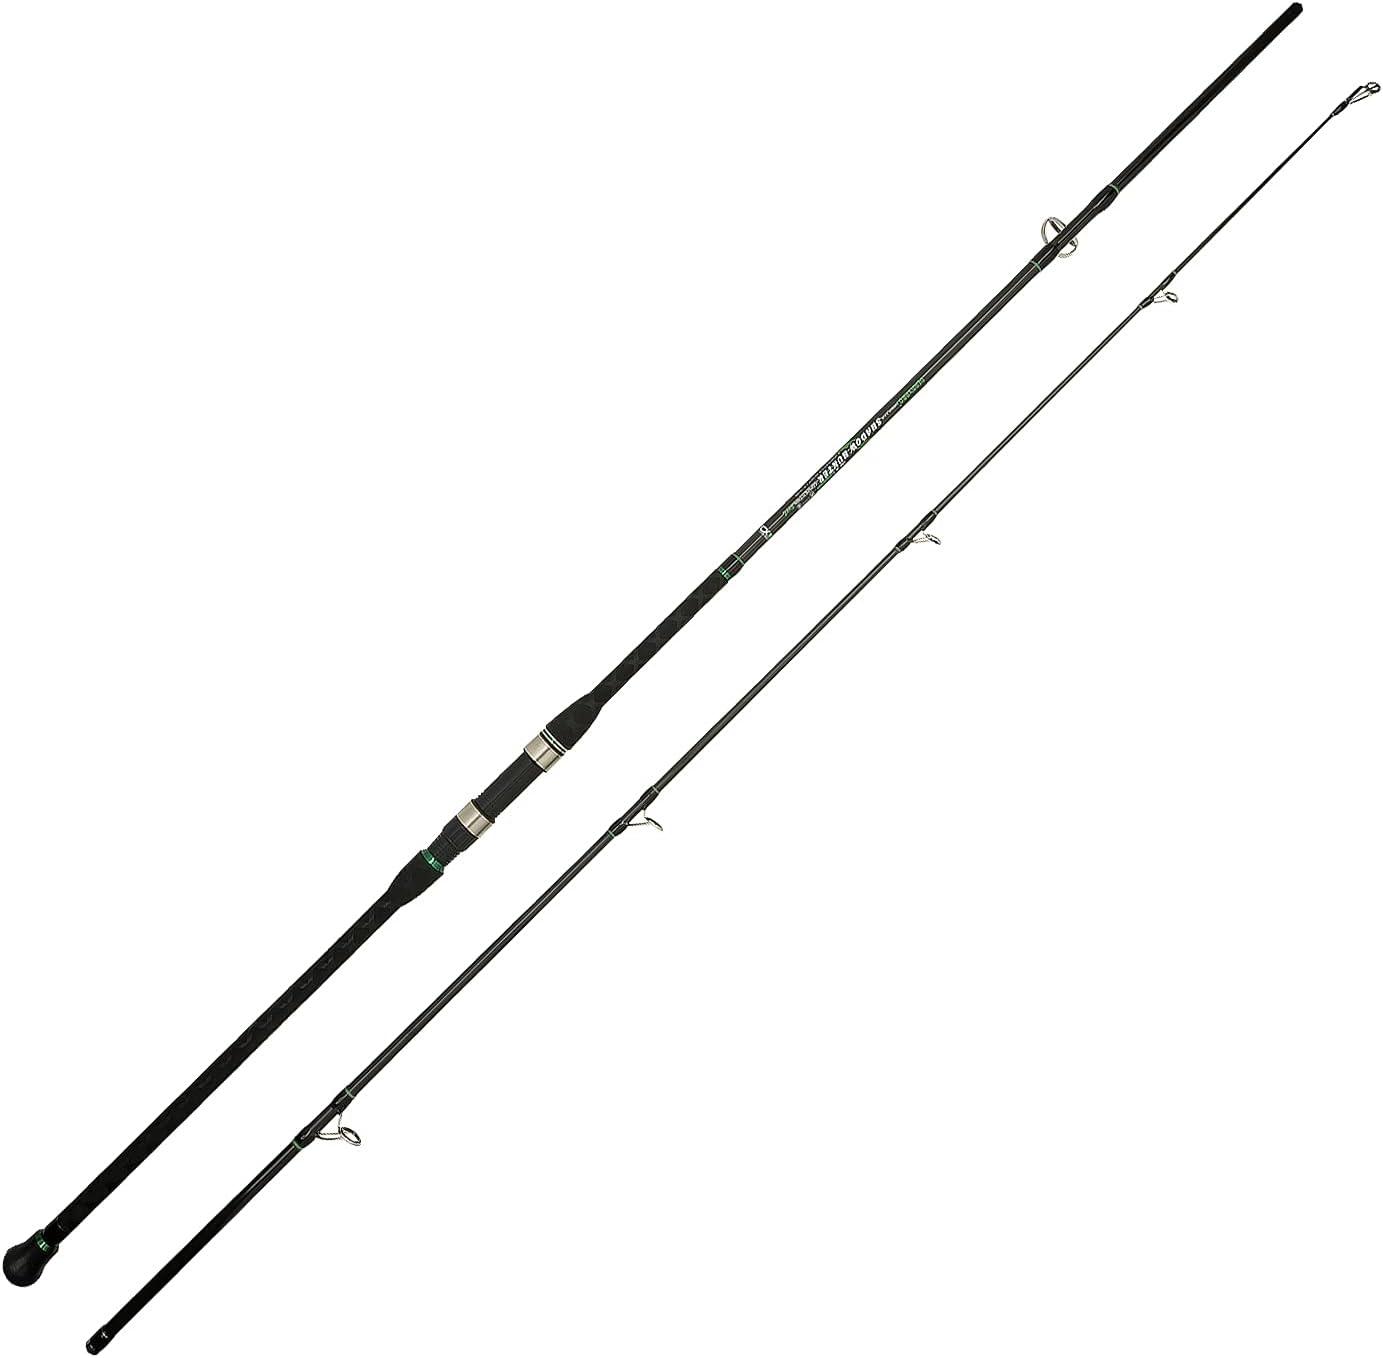  Berrypro Surf Spinning Rod Full Carbon Surf Fishing